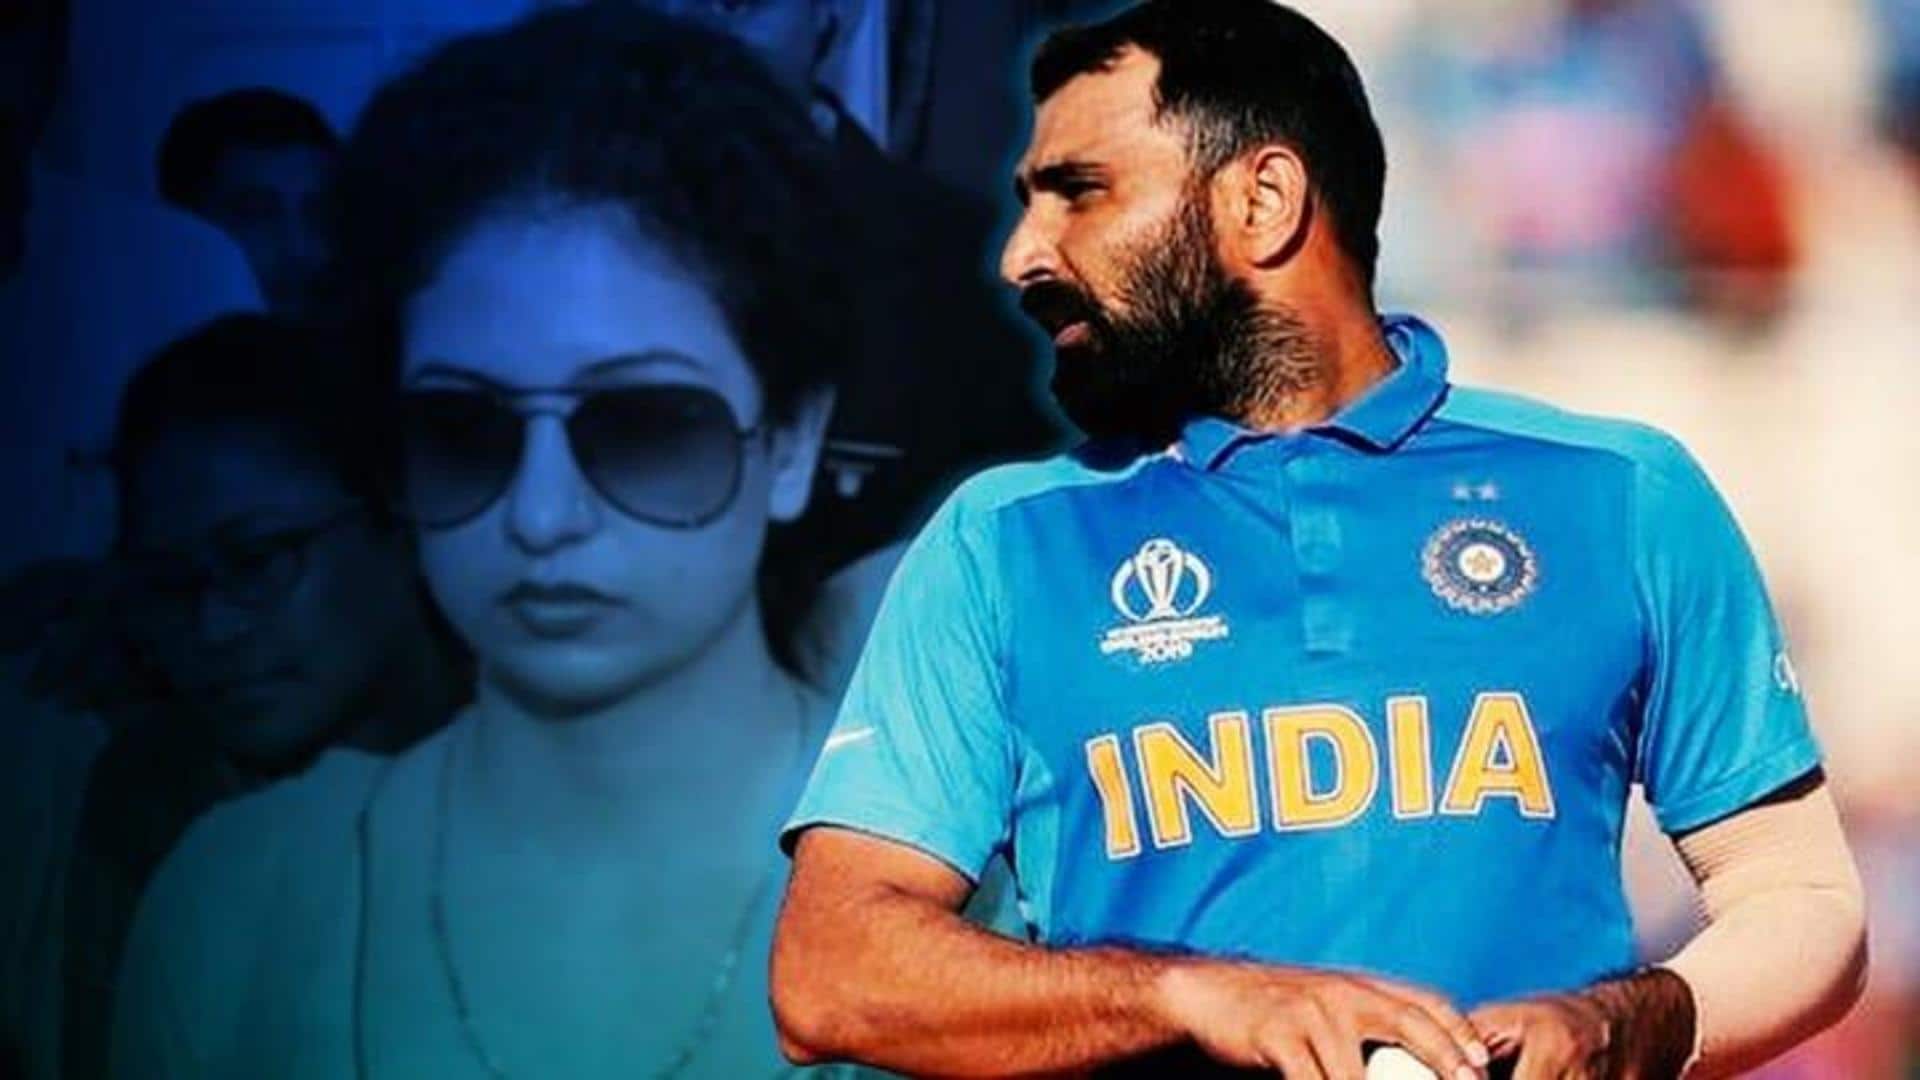 'Mohammed Shami still involved with prostitutes': Estranged wife's shocking claims